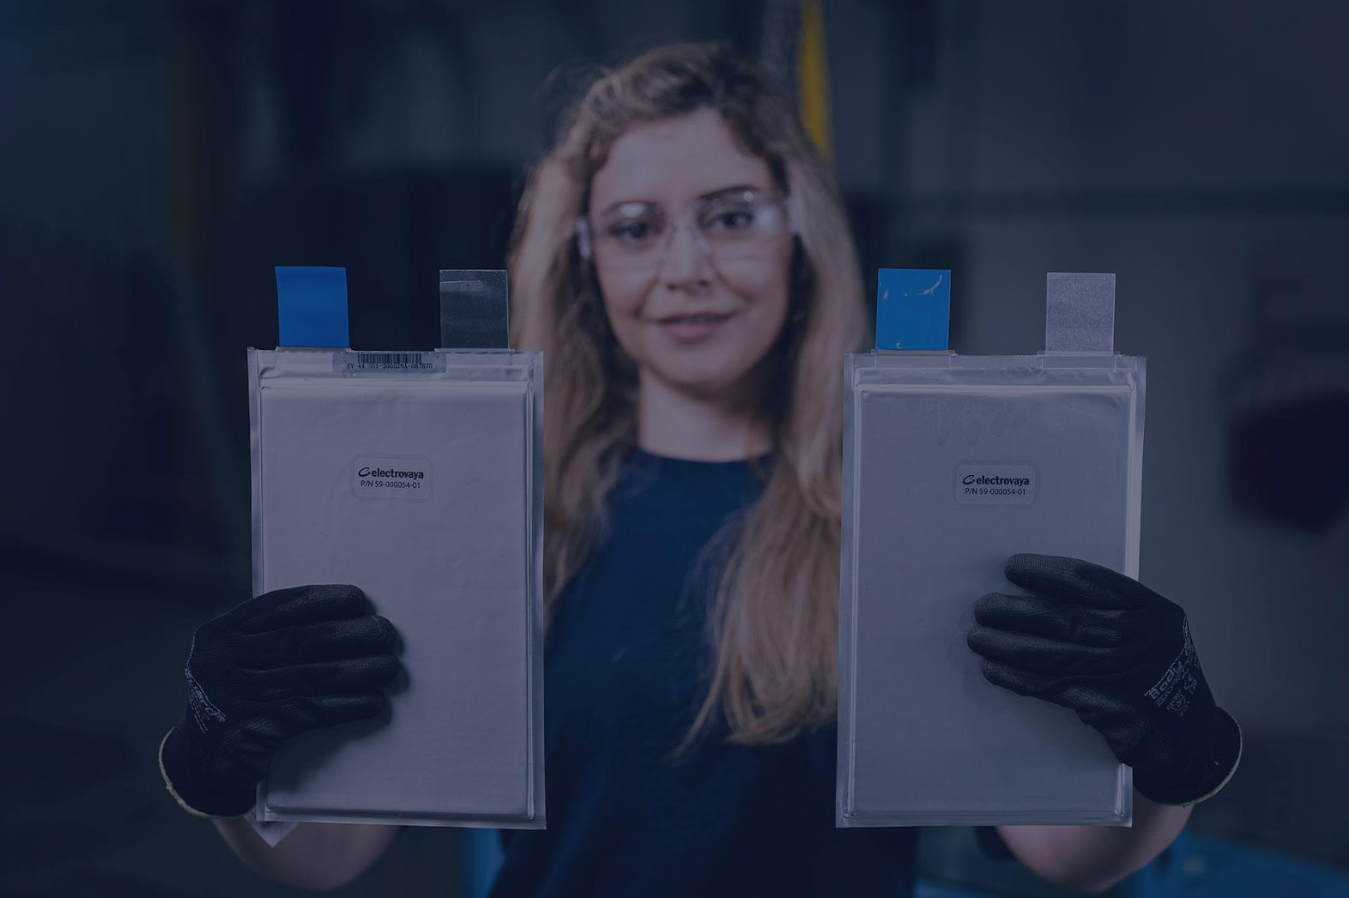 Electrovaya Is Scaling Production On Some Of The Safest, Longest-Lasting Lithium-Ion Batteries On The Market To Help Economies Meet Clean Energy Goals